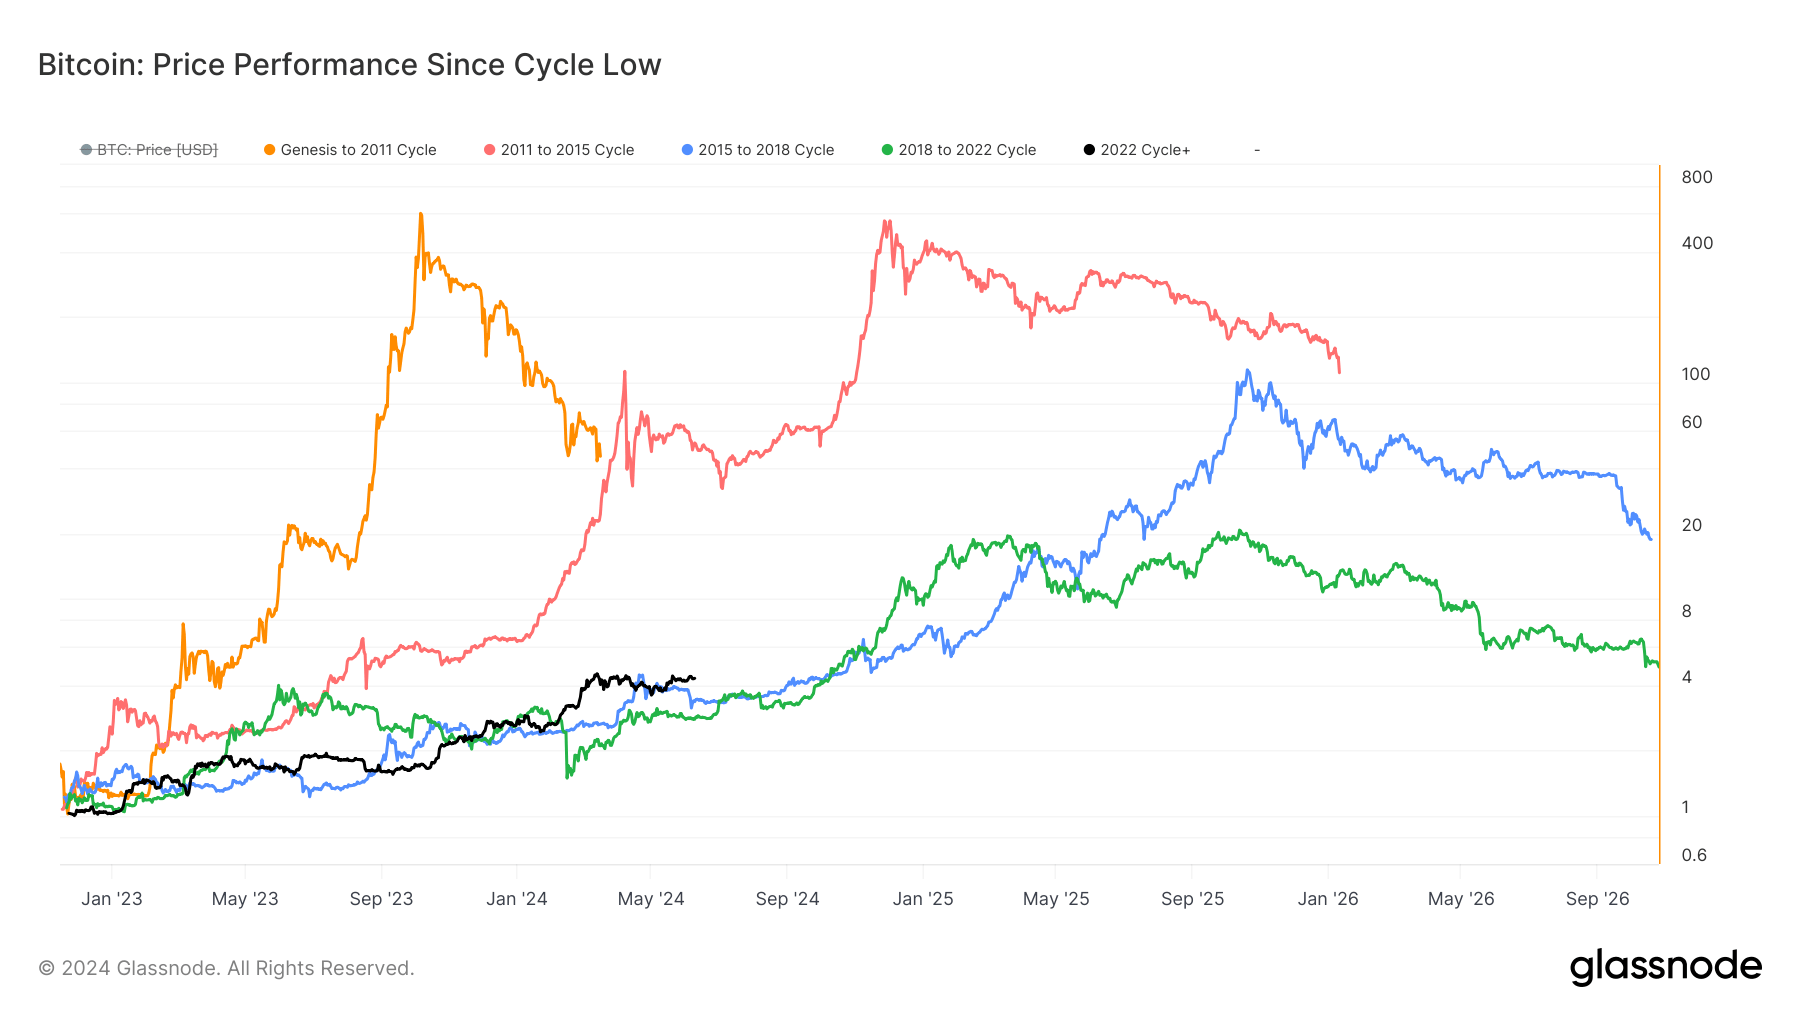 Bitcoin: Price Performance Since Cycle Low: (Source: Glassnode)